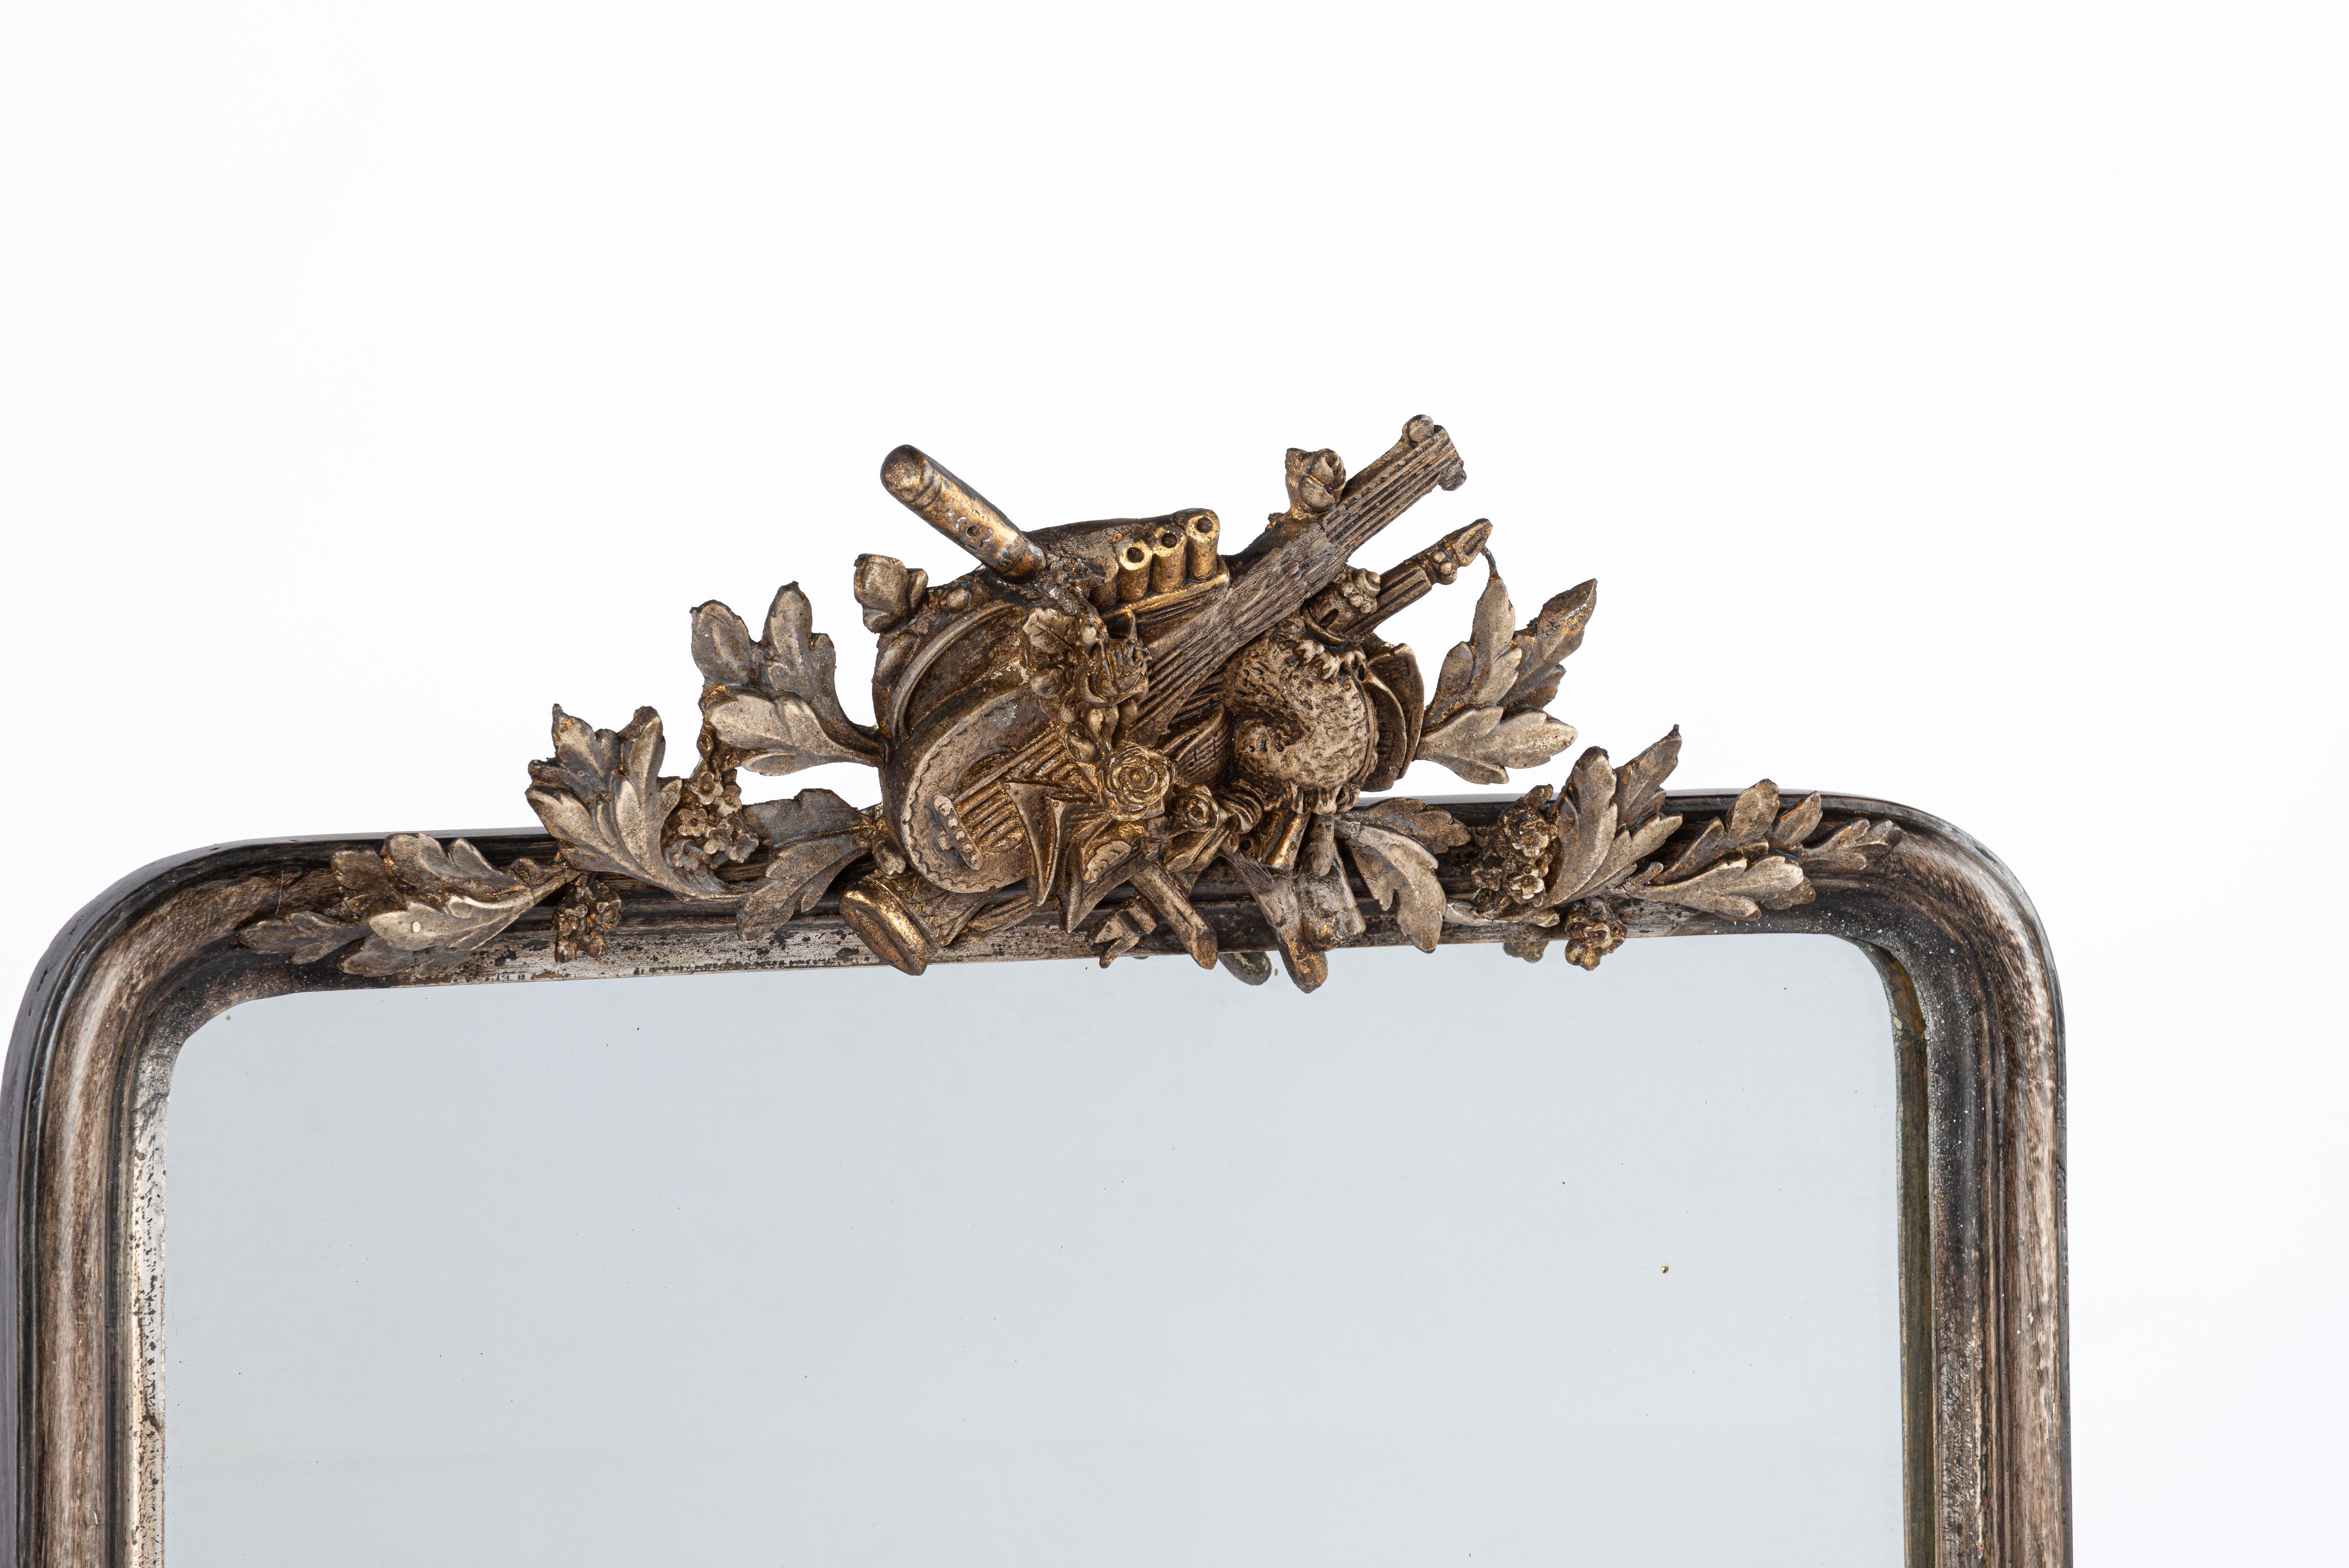 On offer here is a very handsome and tall pier mirror that was made in the late 19th century in Northern France. Its sleek frame with upper rounded corners is typical for the Louis Philippe style. The elaborate crest features a rich variety of